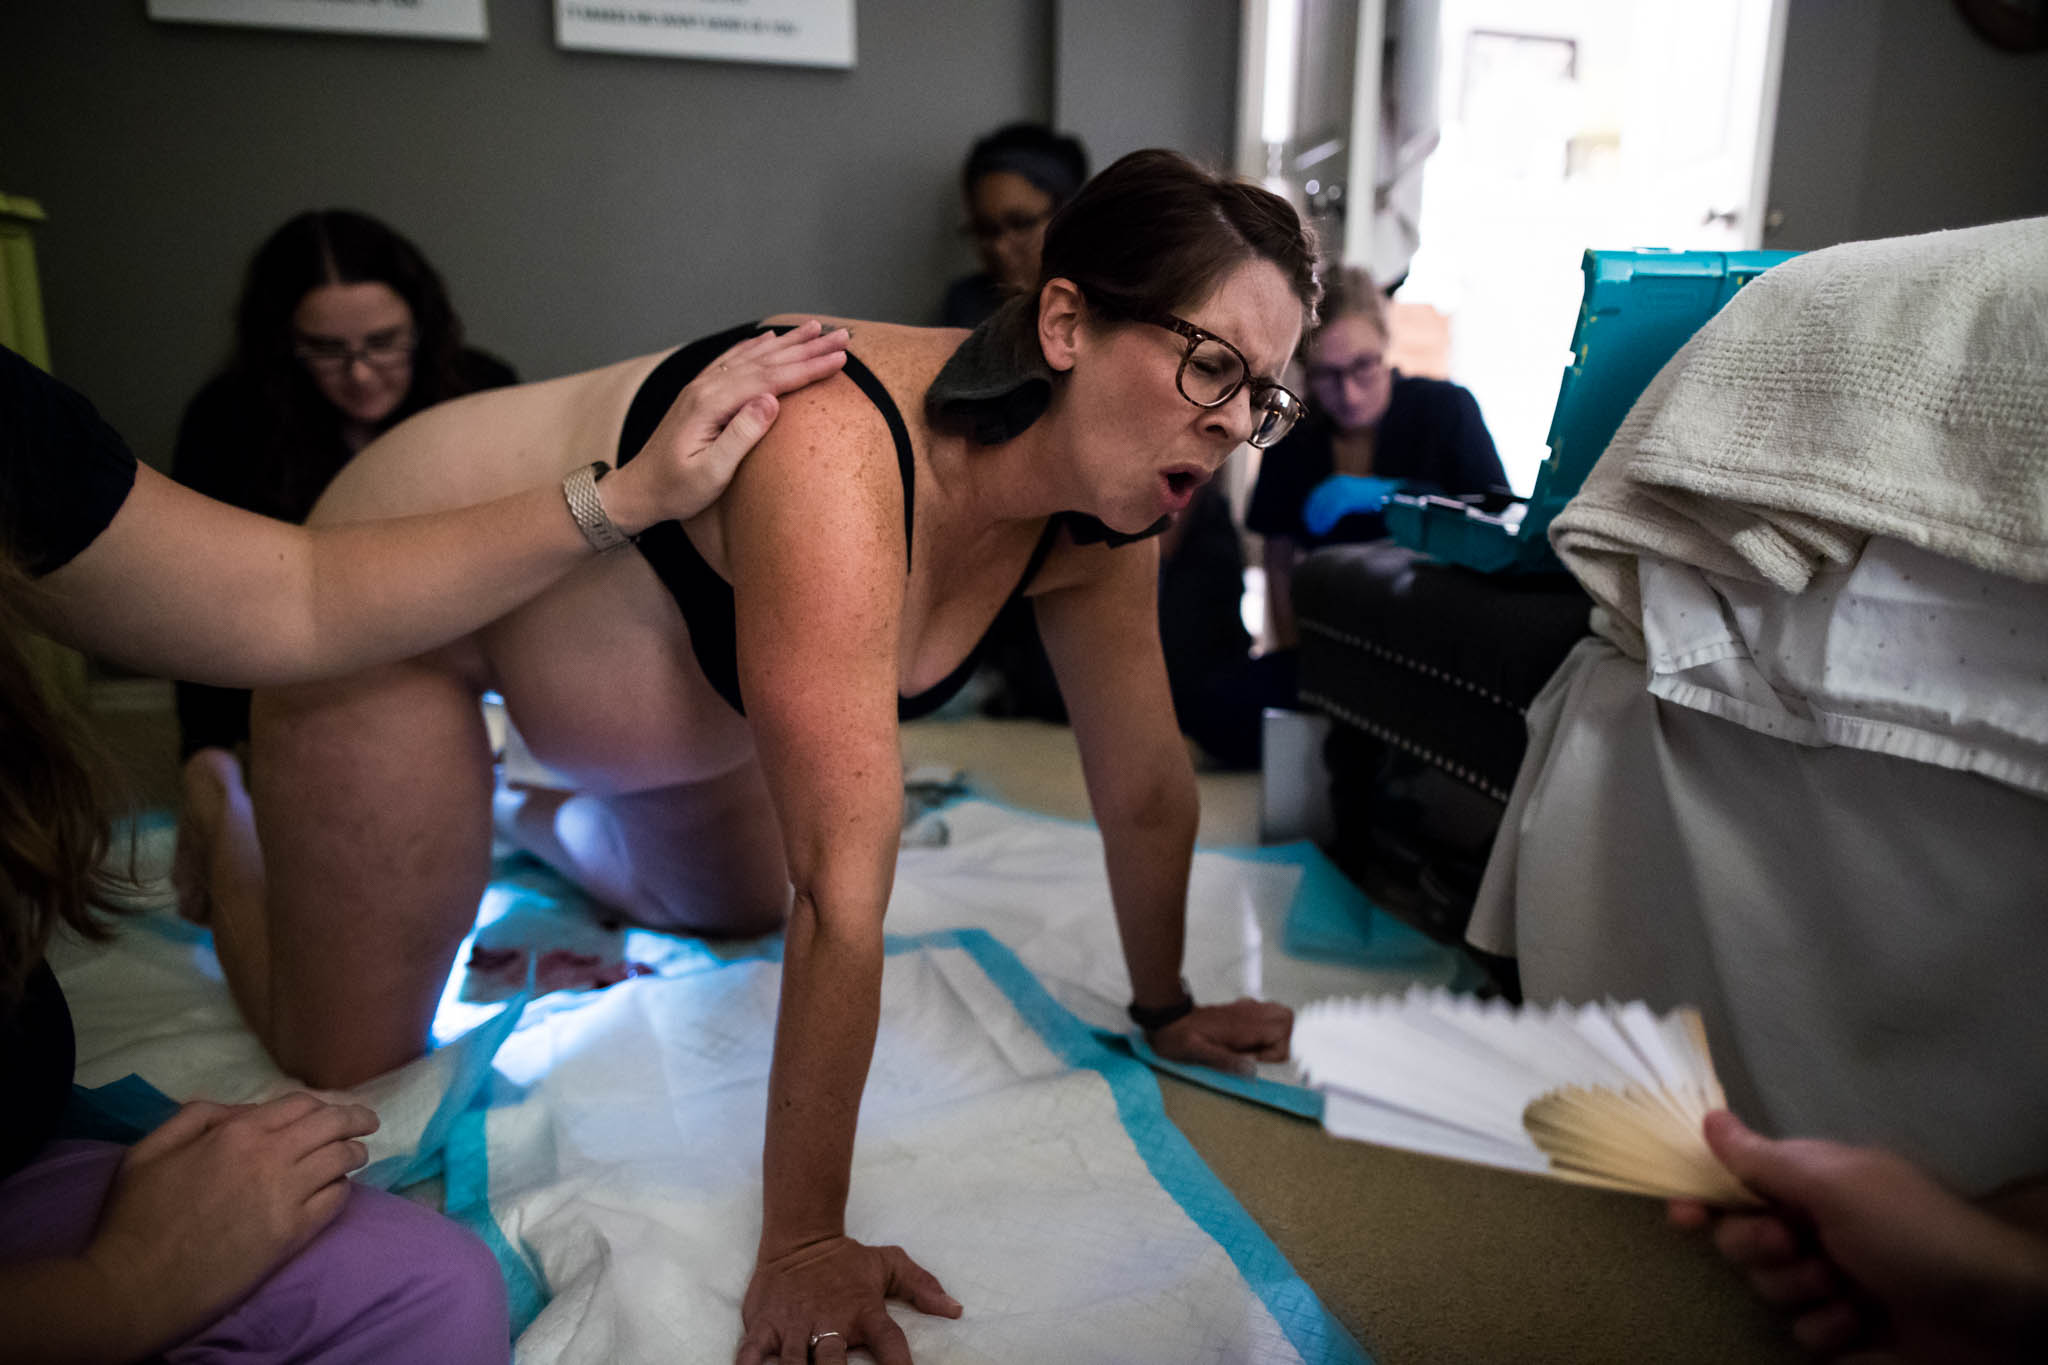 Denton Birth Photographer, Lawren Rose Photography, captures the emotions on a Mom's face as she roars in intensity from the contractions that are pushing out her baby